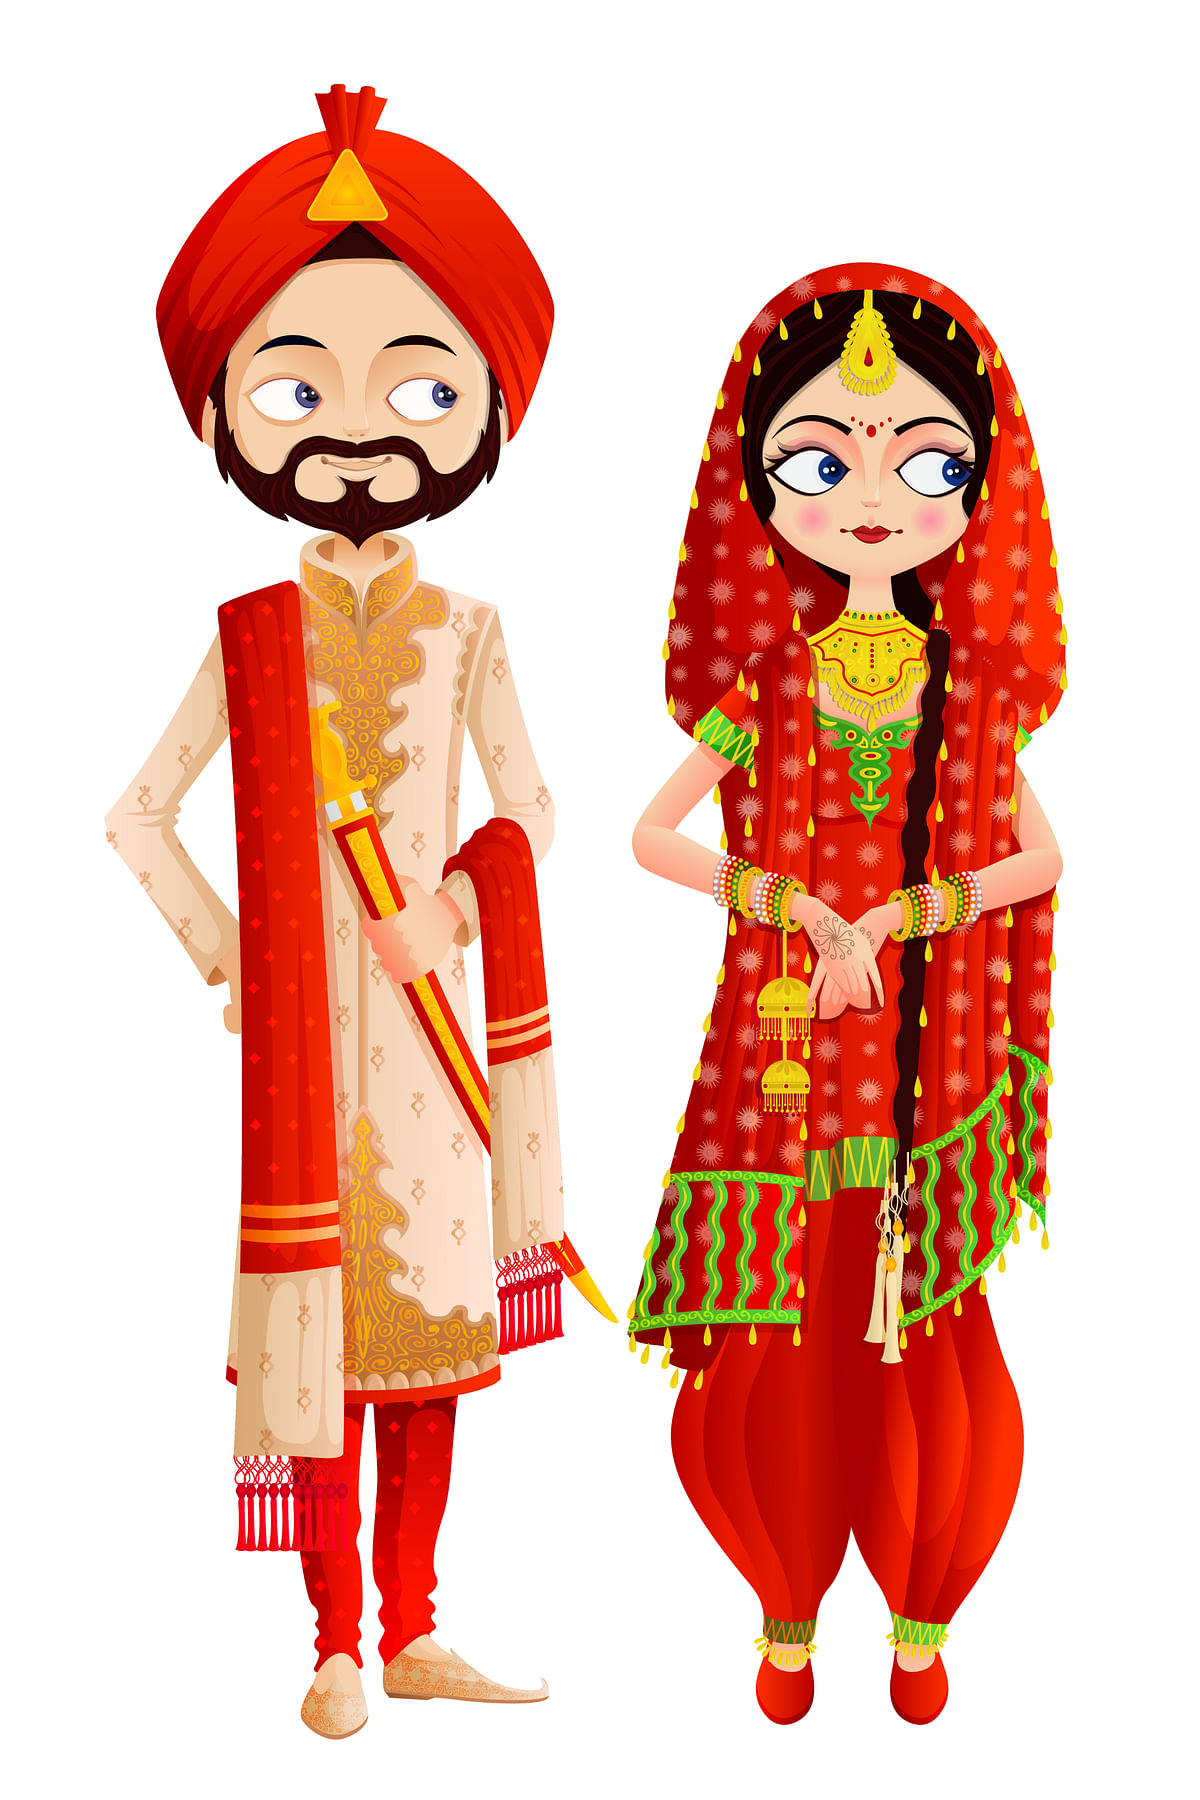 What do the anxious brides and grooms getting hitched today, tomorrow and day after have to say about Modi’s move?